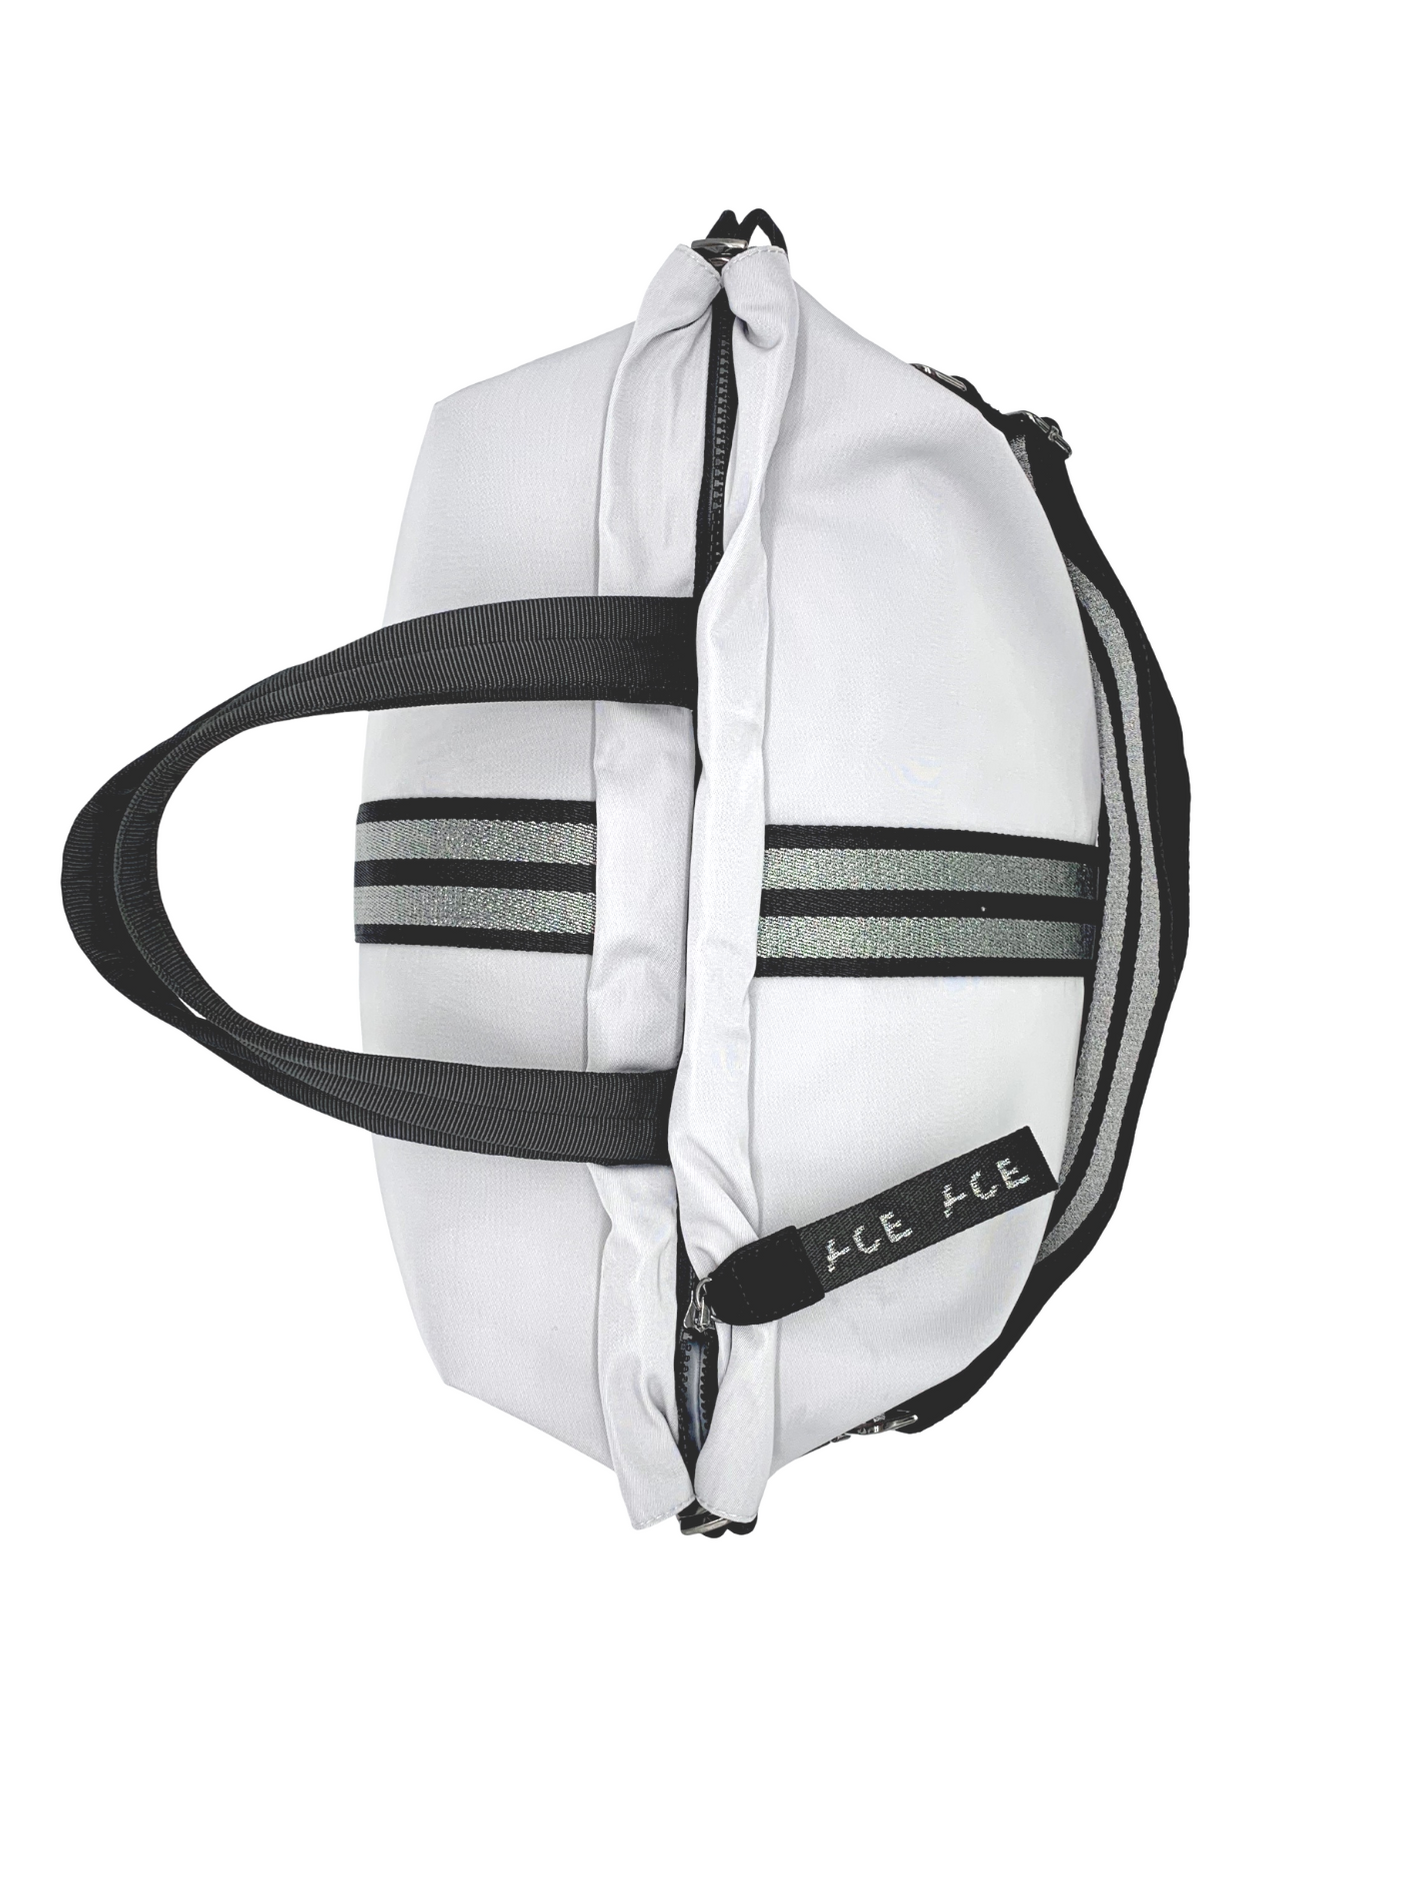 ACE Light Grey Sportsbag in eco friendly material